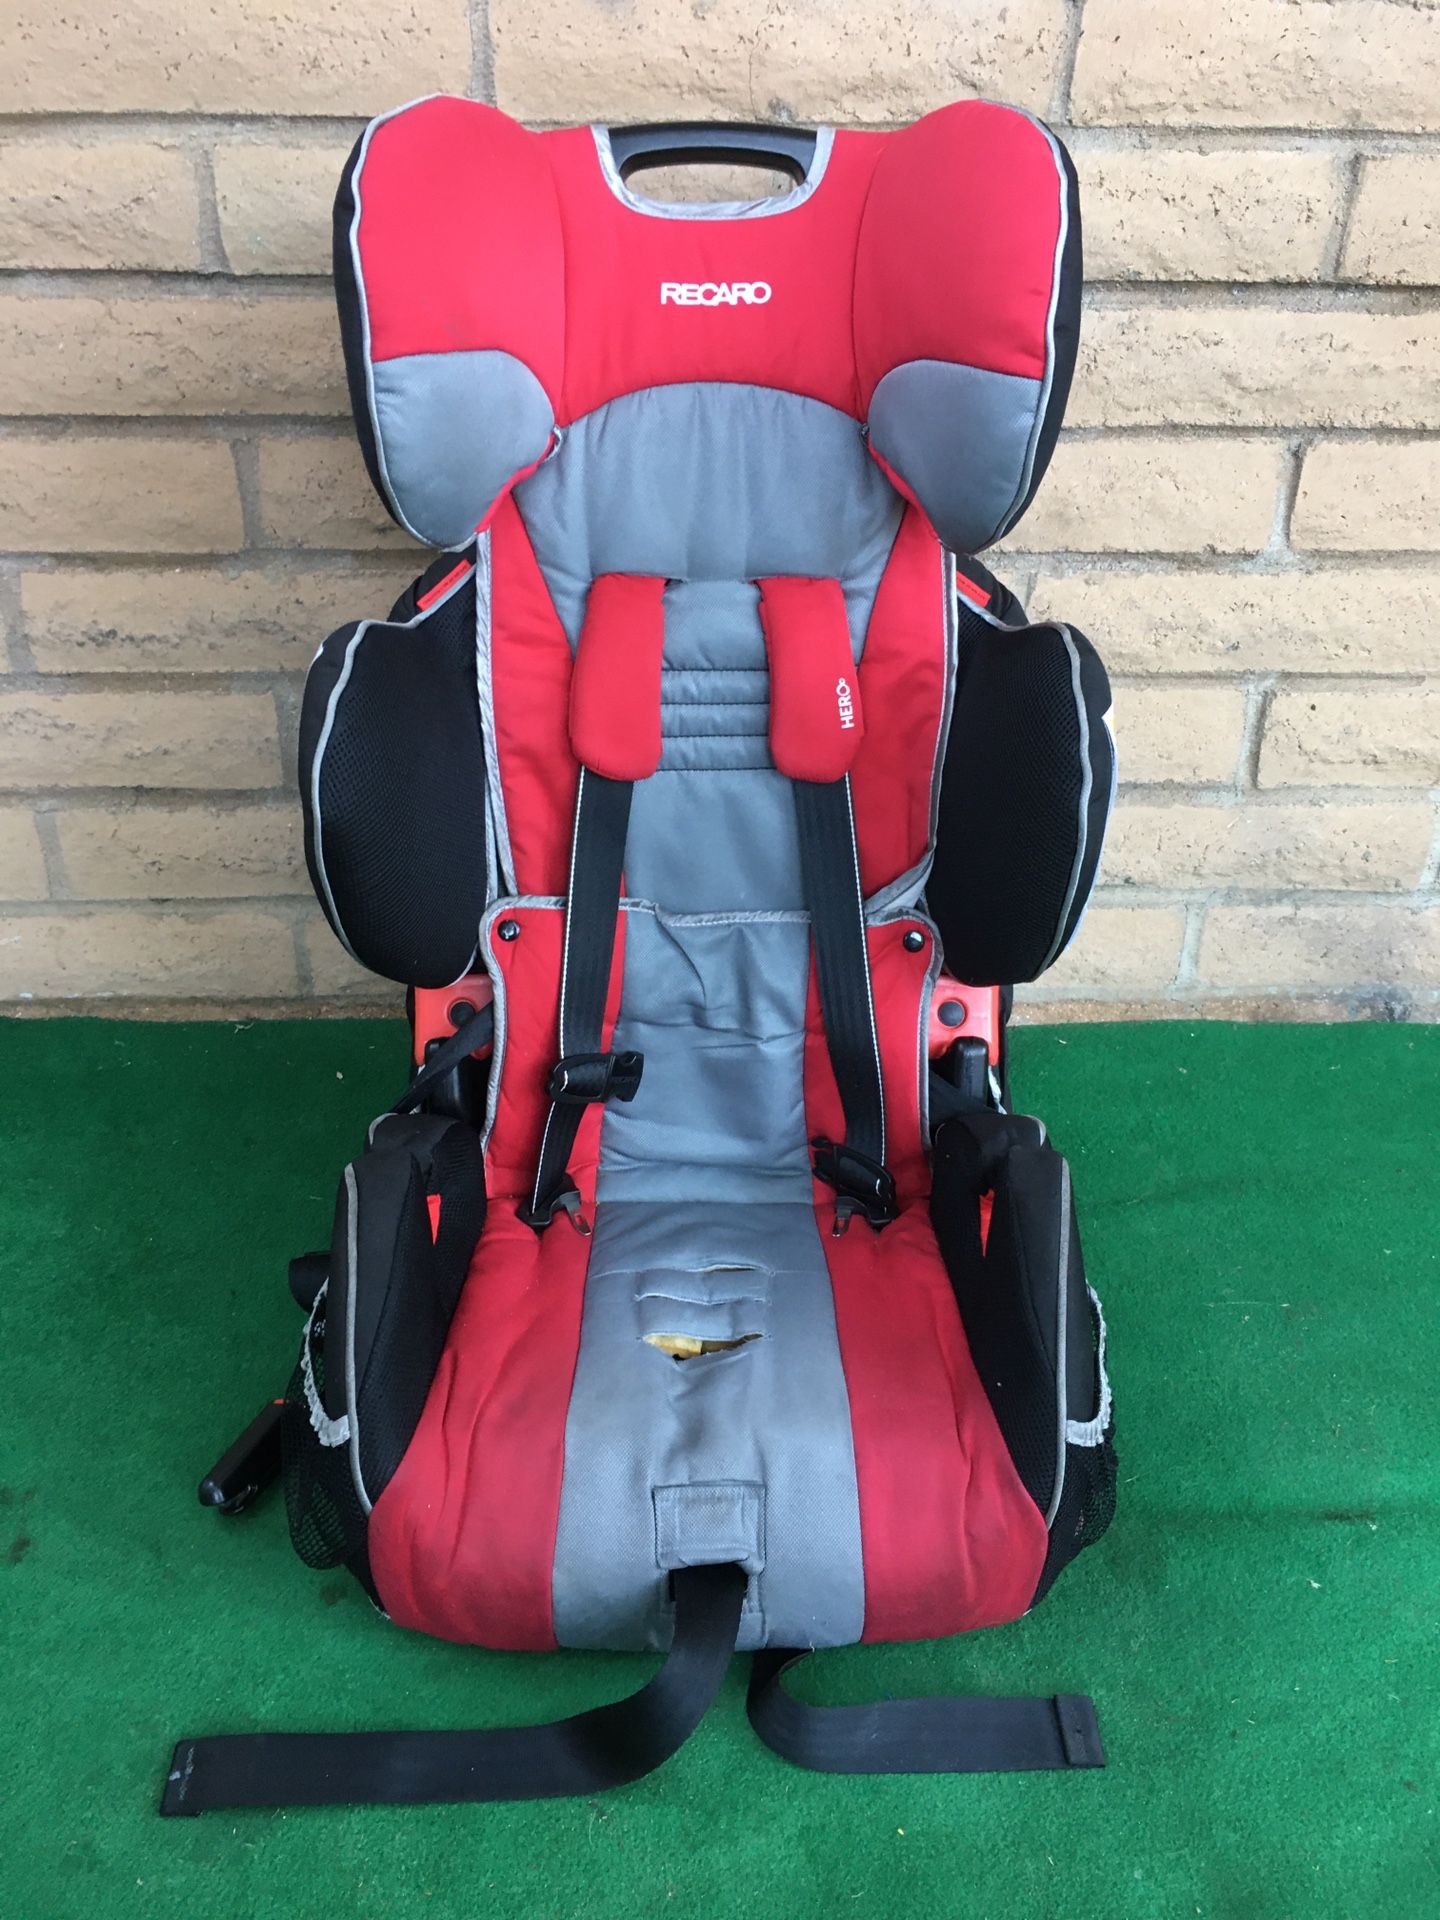 Recaro Hero kids booster car seat large size, adjustable from 20 to 65 pounds, height 27” to 49” inches